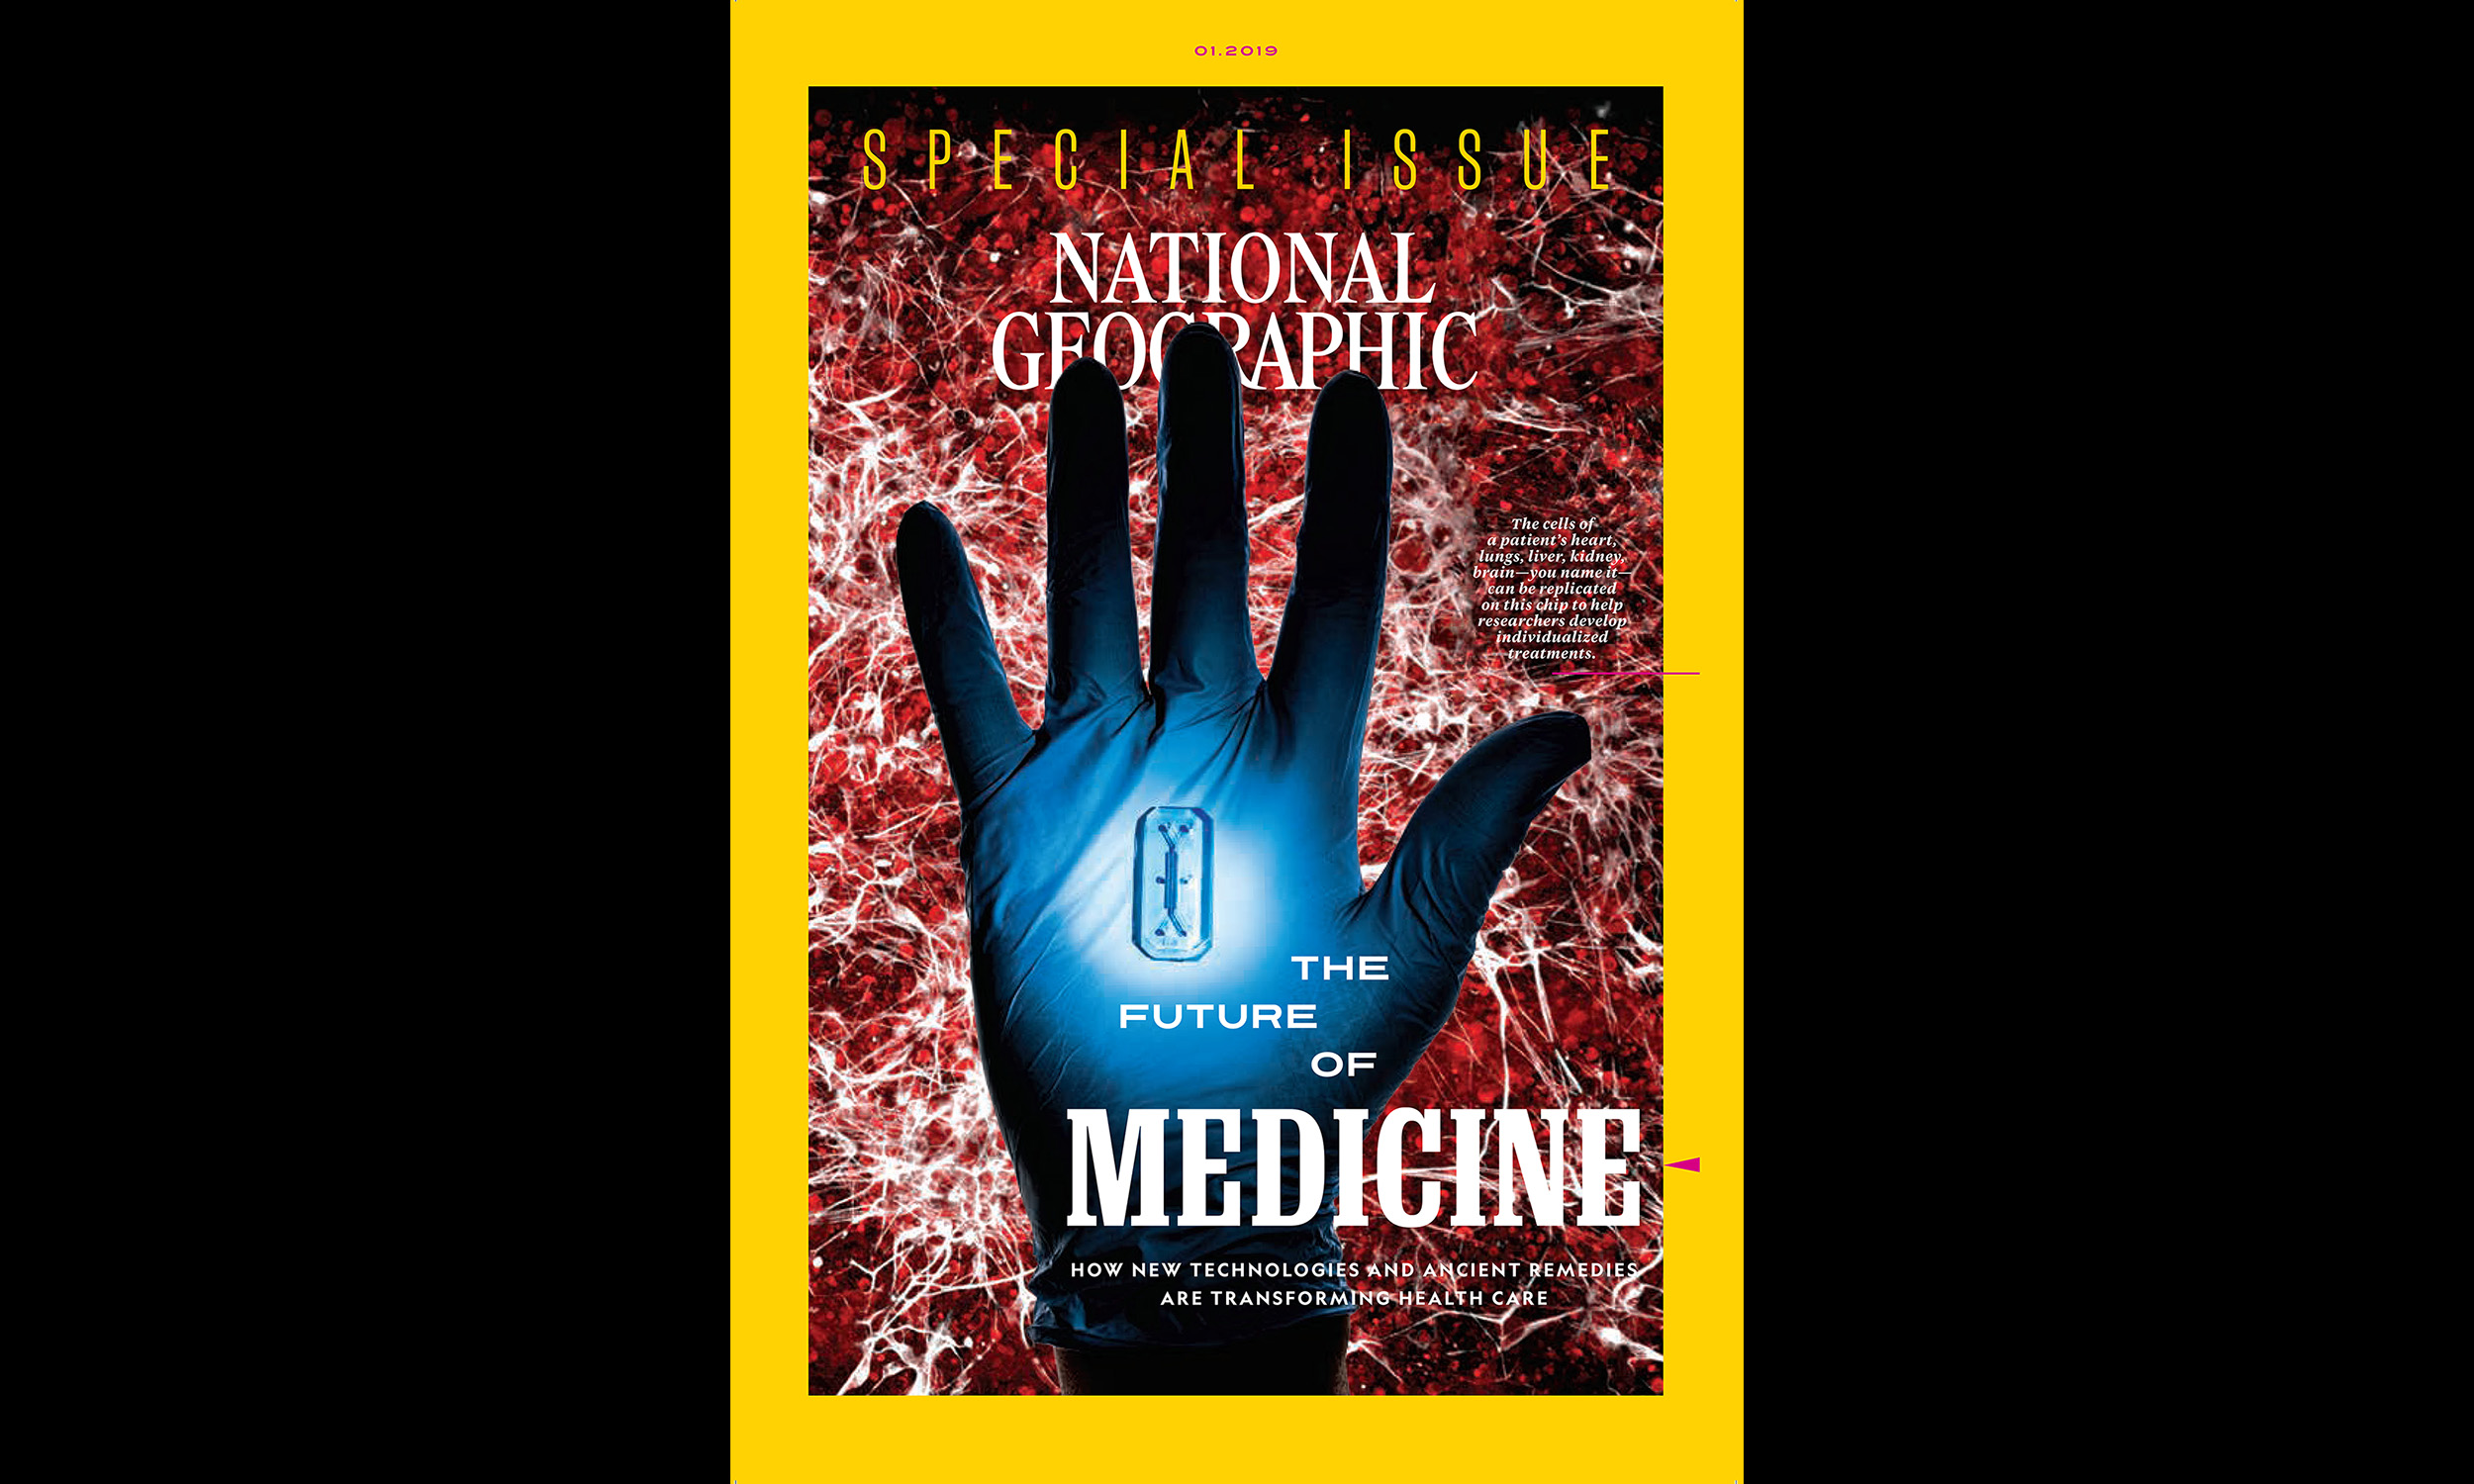 PHOTO: The National Geographic January 2019 special single topic issue, The Future of Medicine.